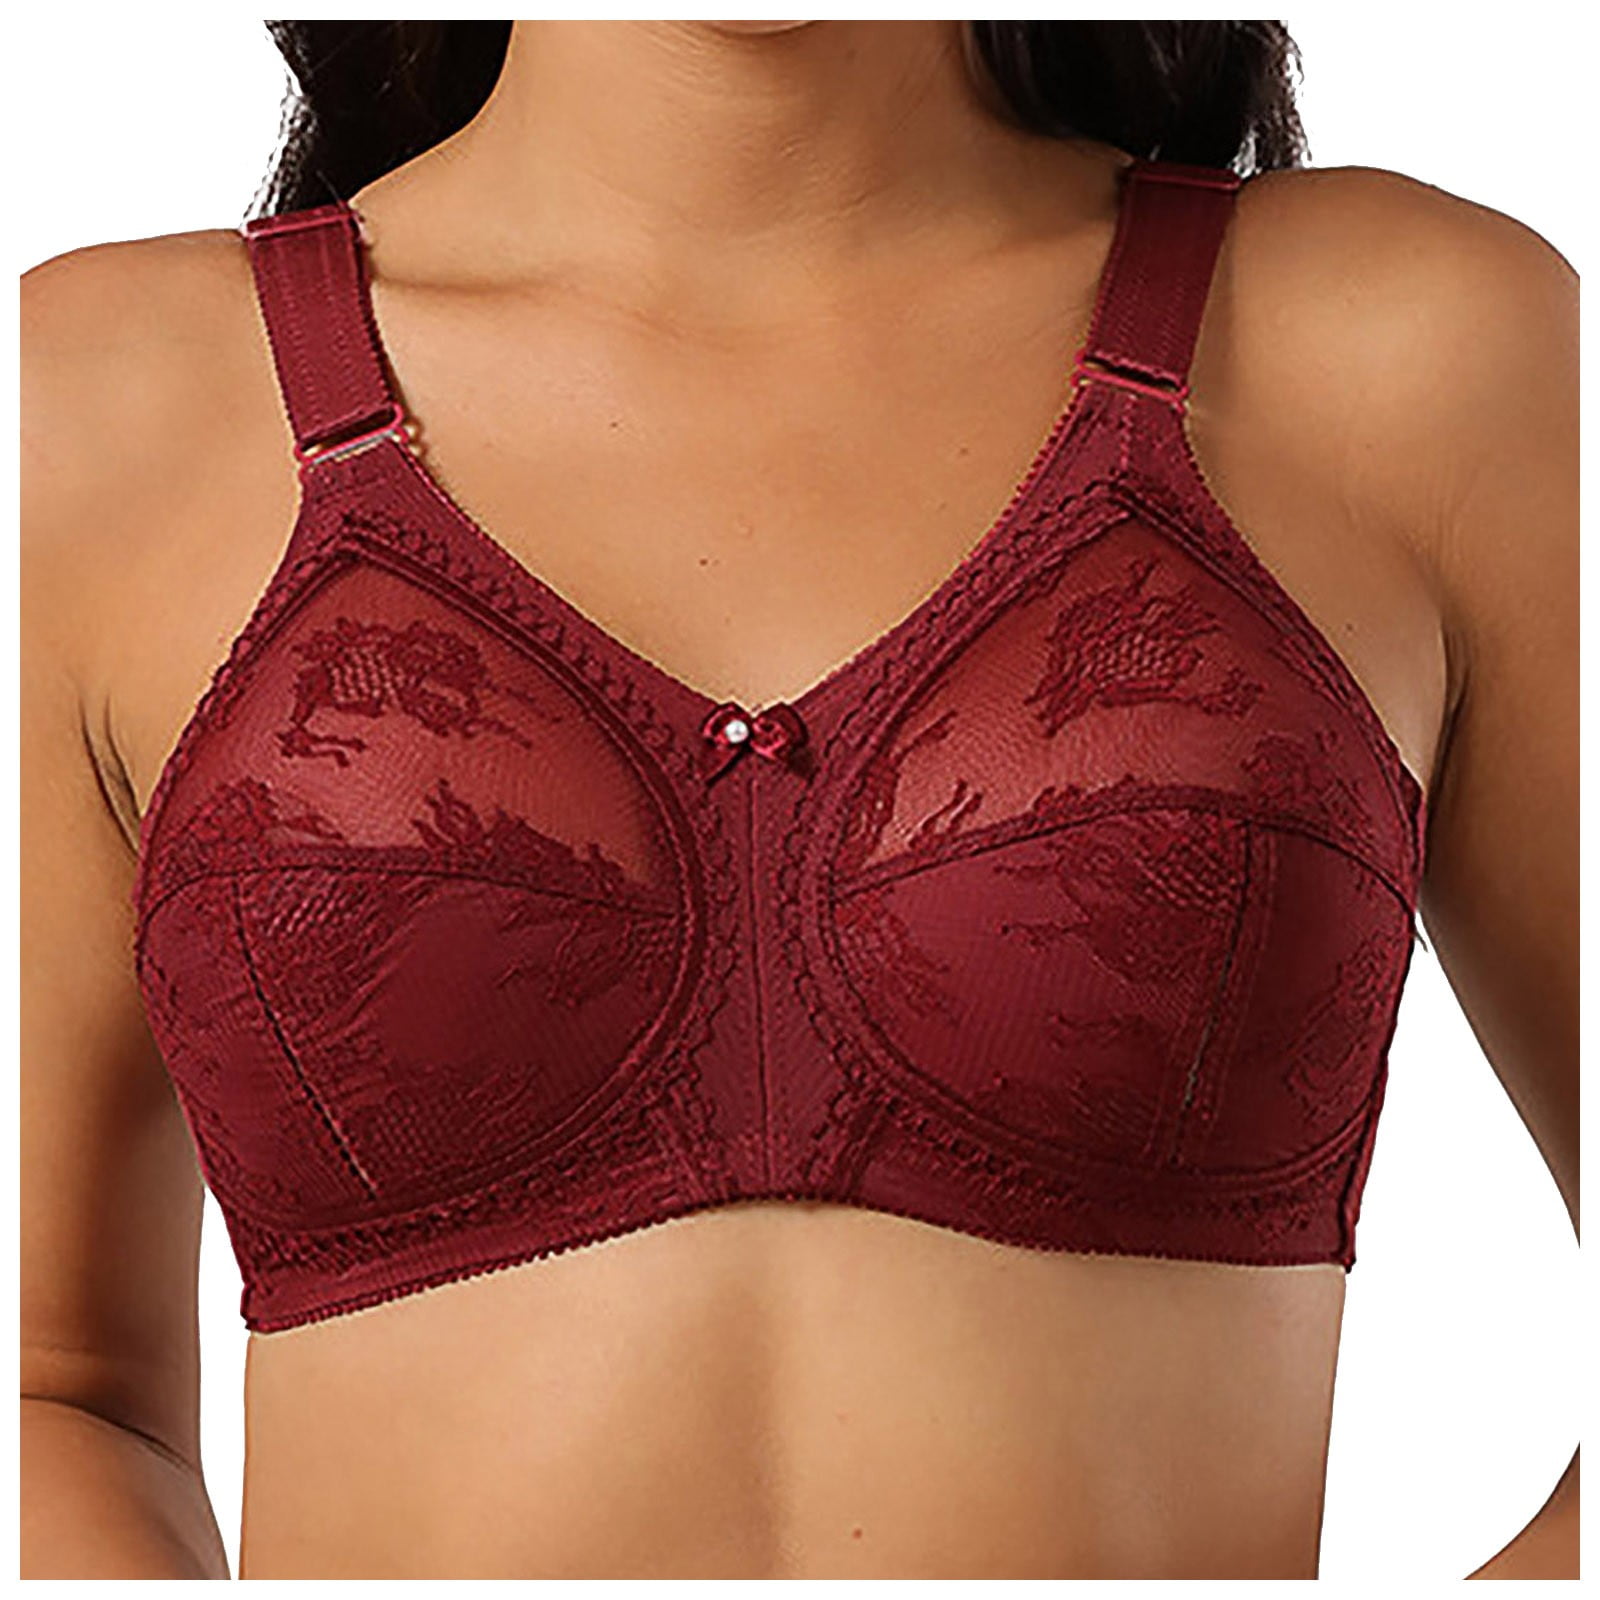 Bras for Women Bras for Women Ultra Thin full Cup Bra without